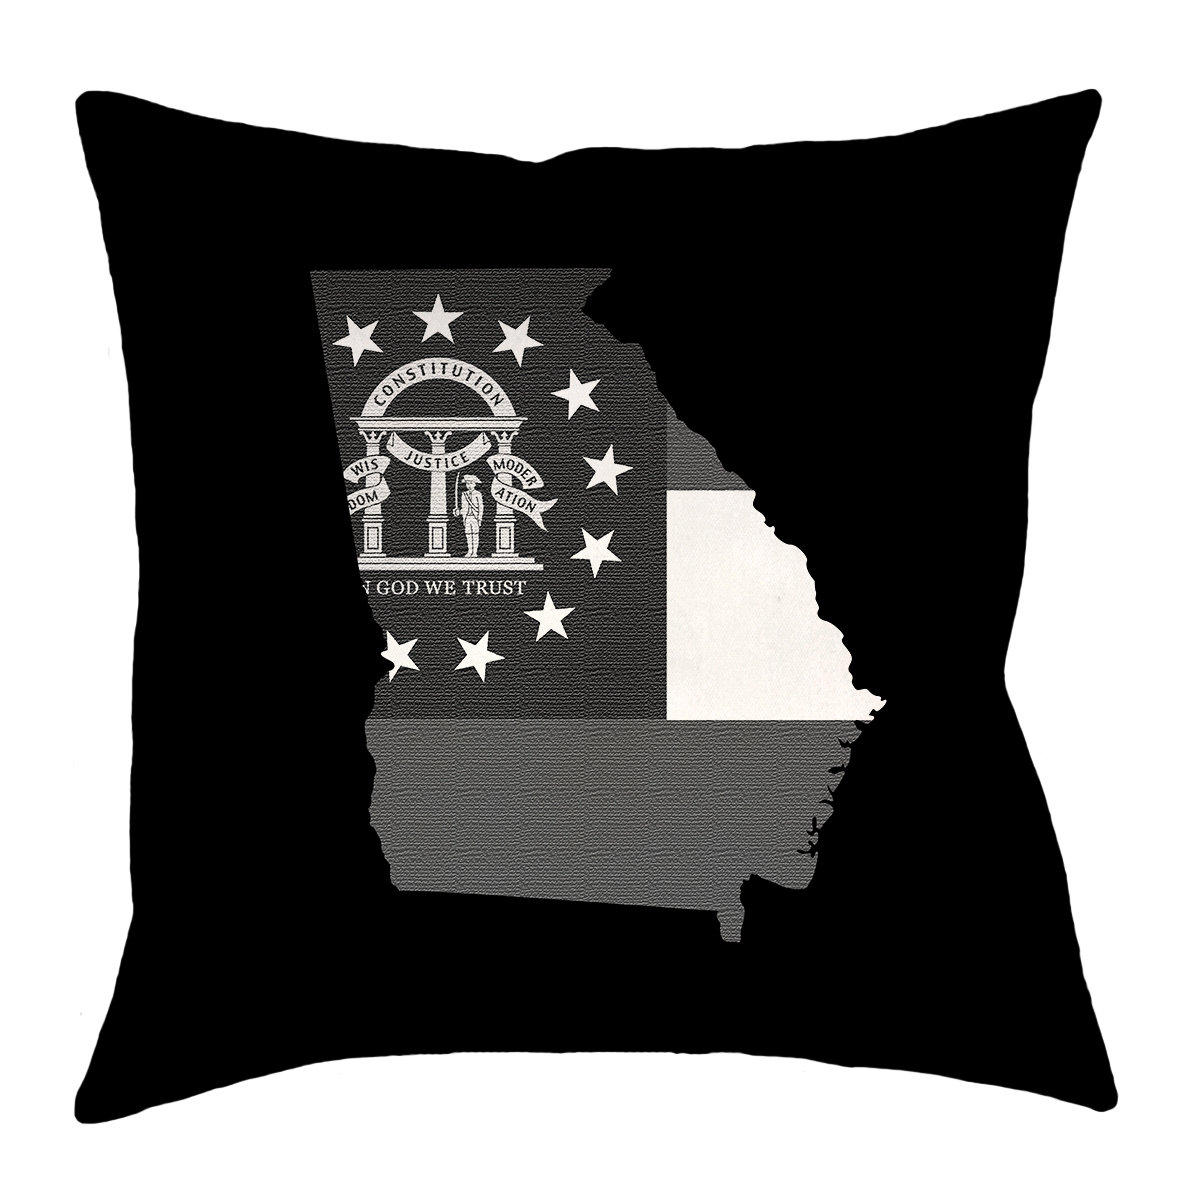 ArtVerse Katelyn Smith 36 x 36 Floor Double Sided Print with Concealed Zipper & Insert Idaho Pillow